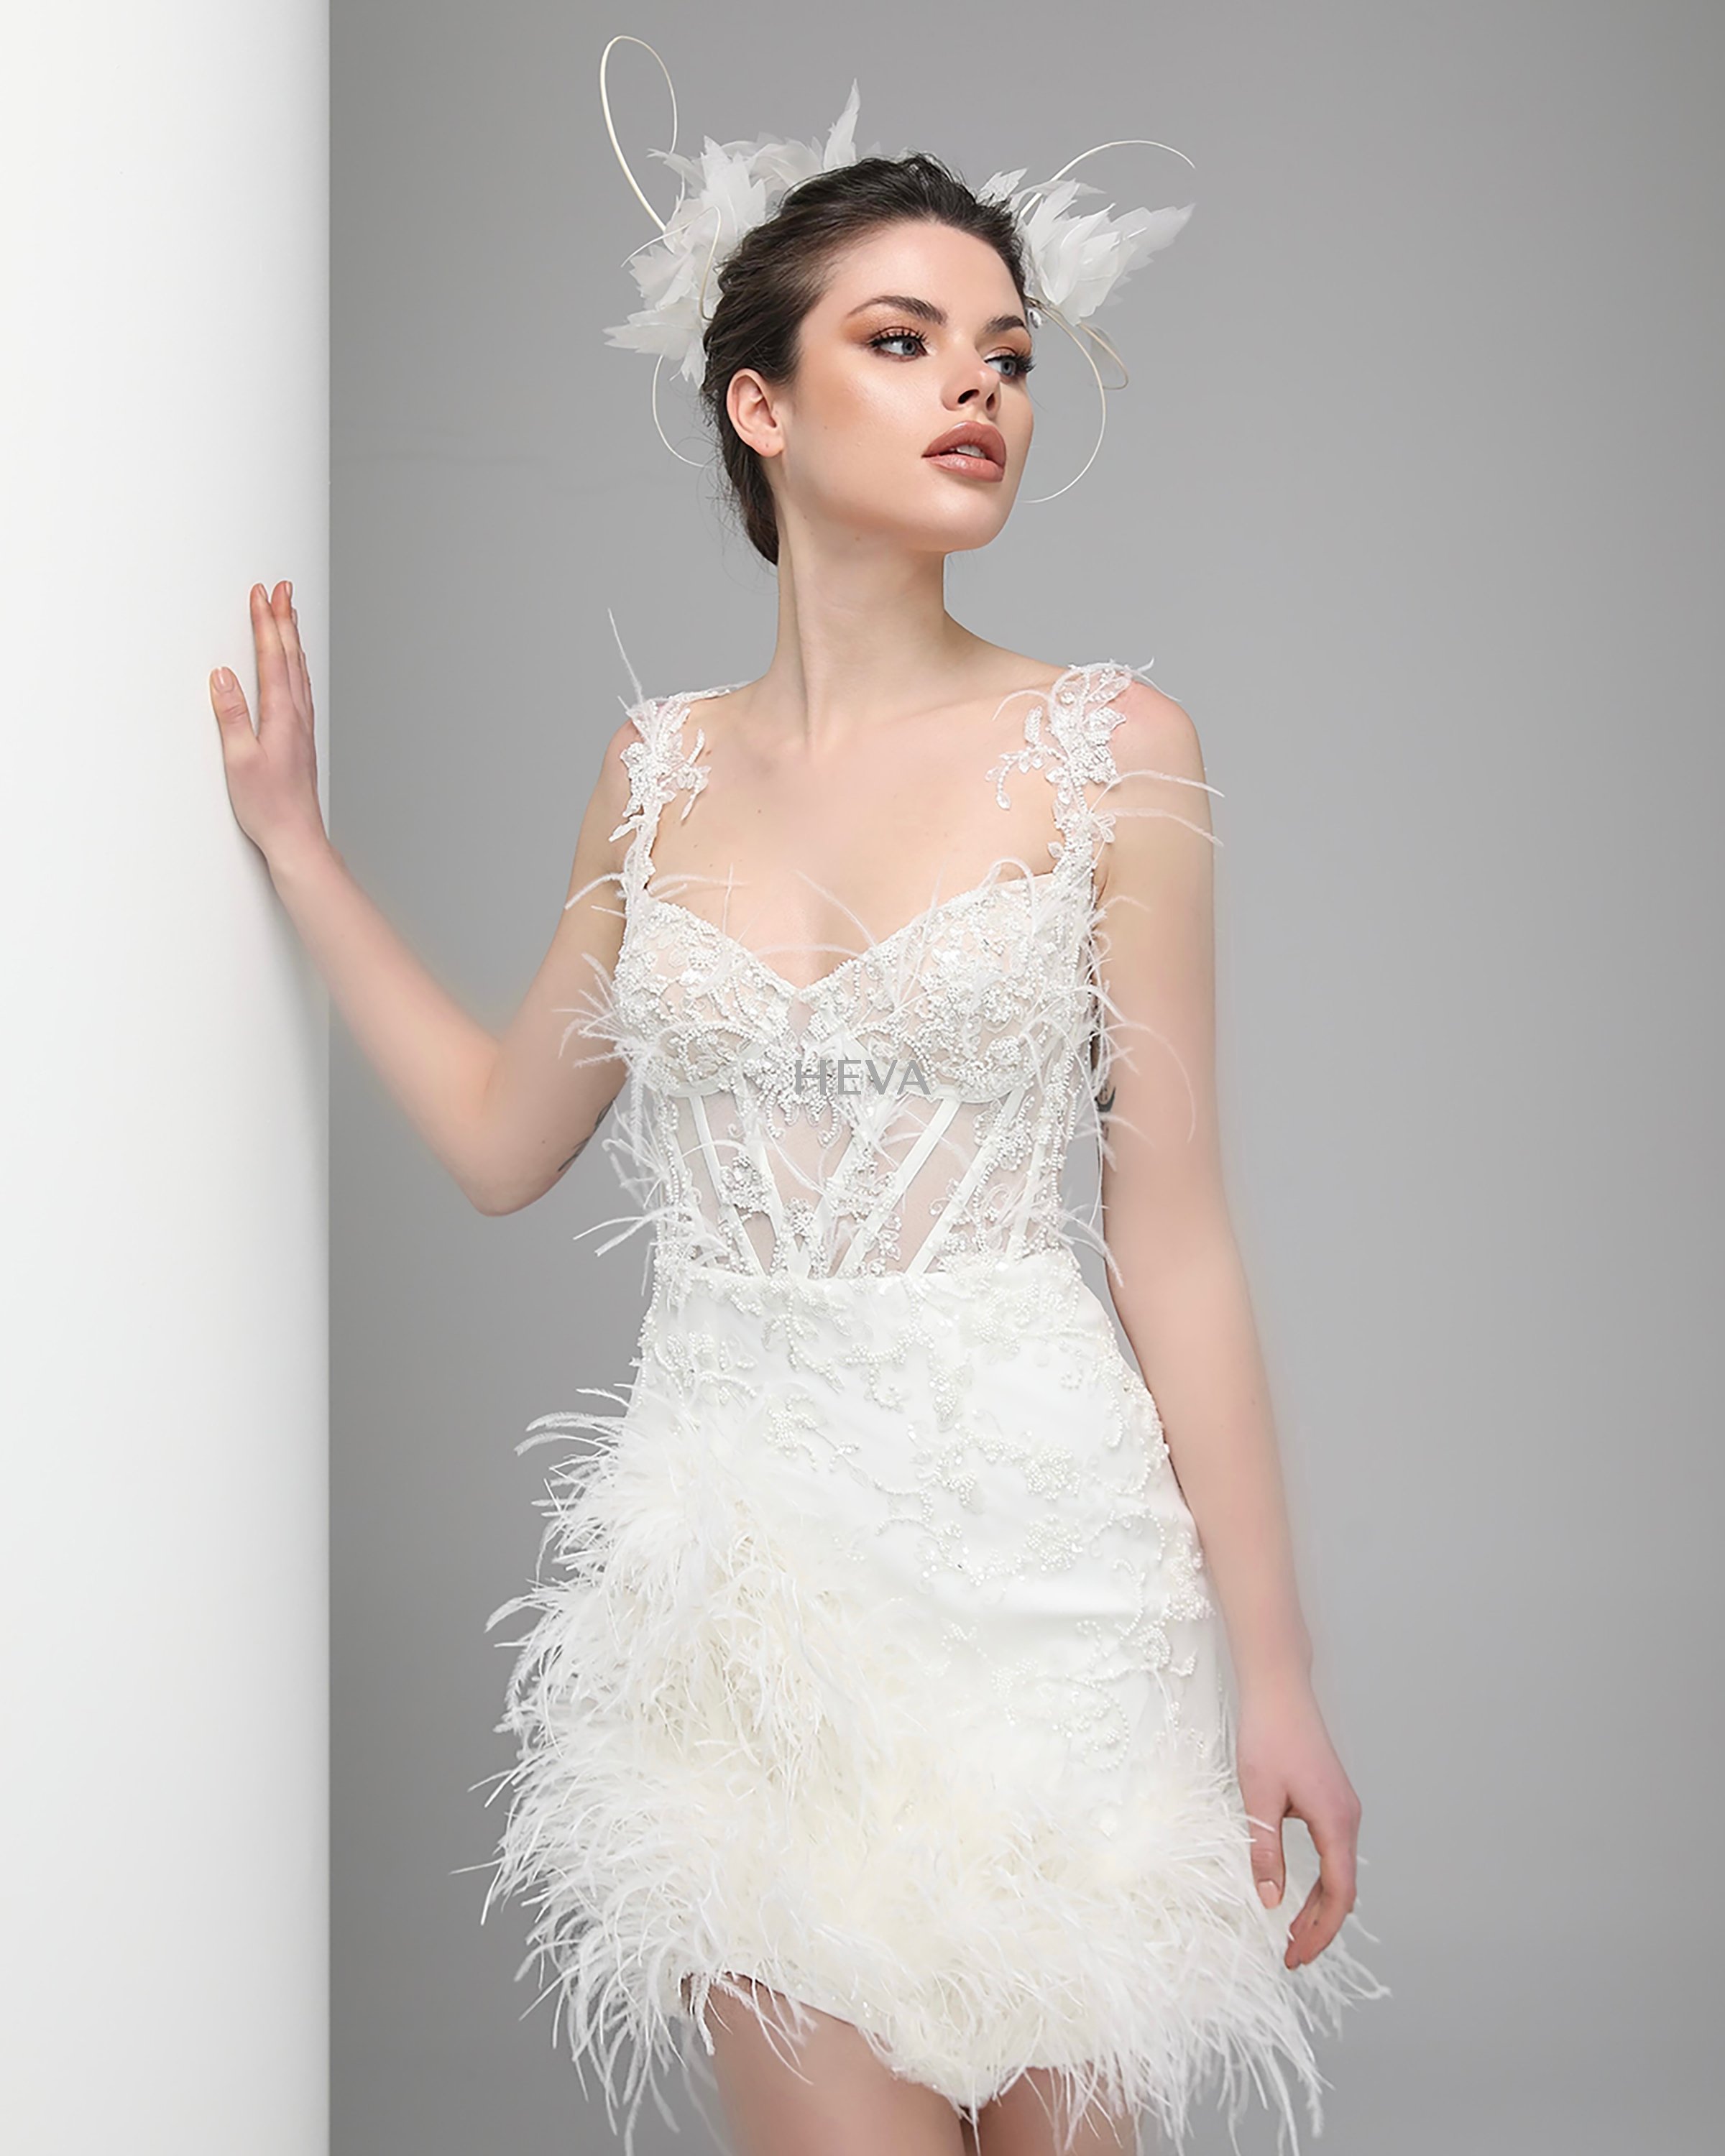 HV22101 - Strapless, M-Neck, Corset-Bodiced Party Dress with Asymmetrical Cut, Embellished with Beads and Feathers